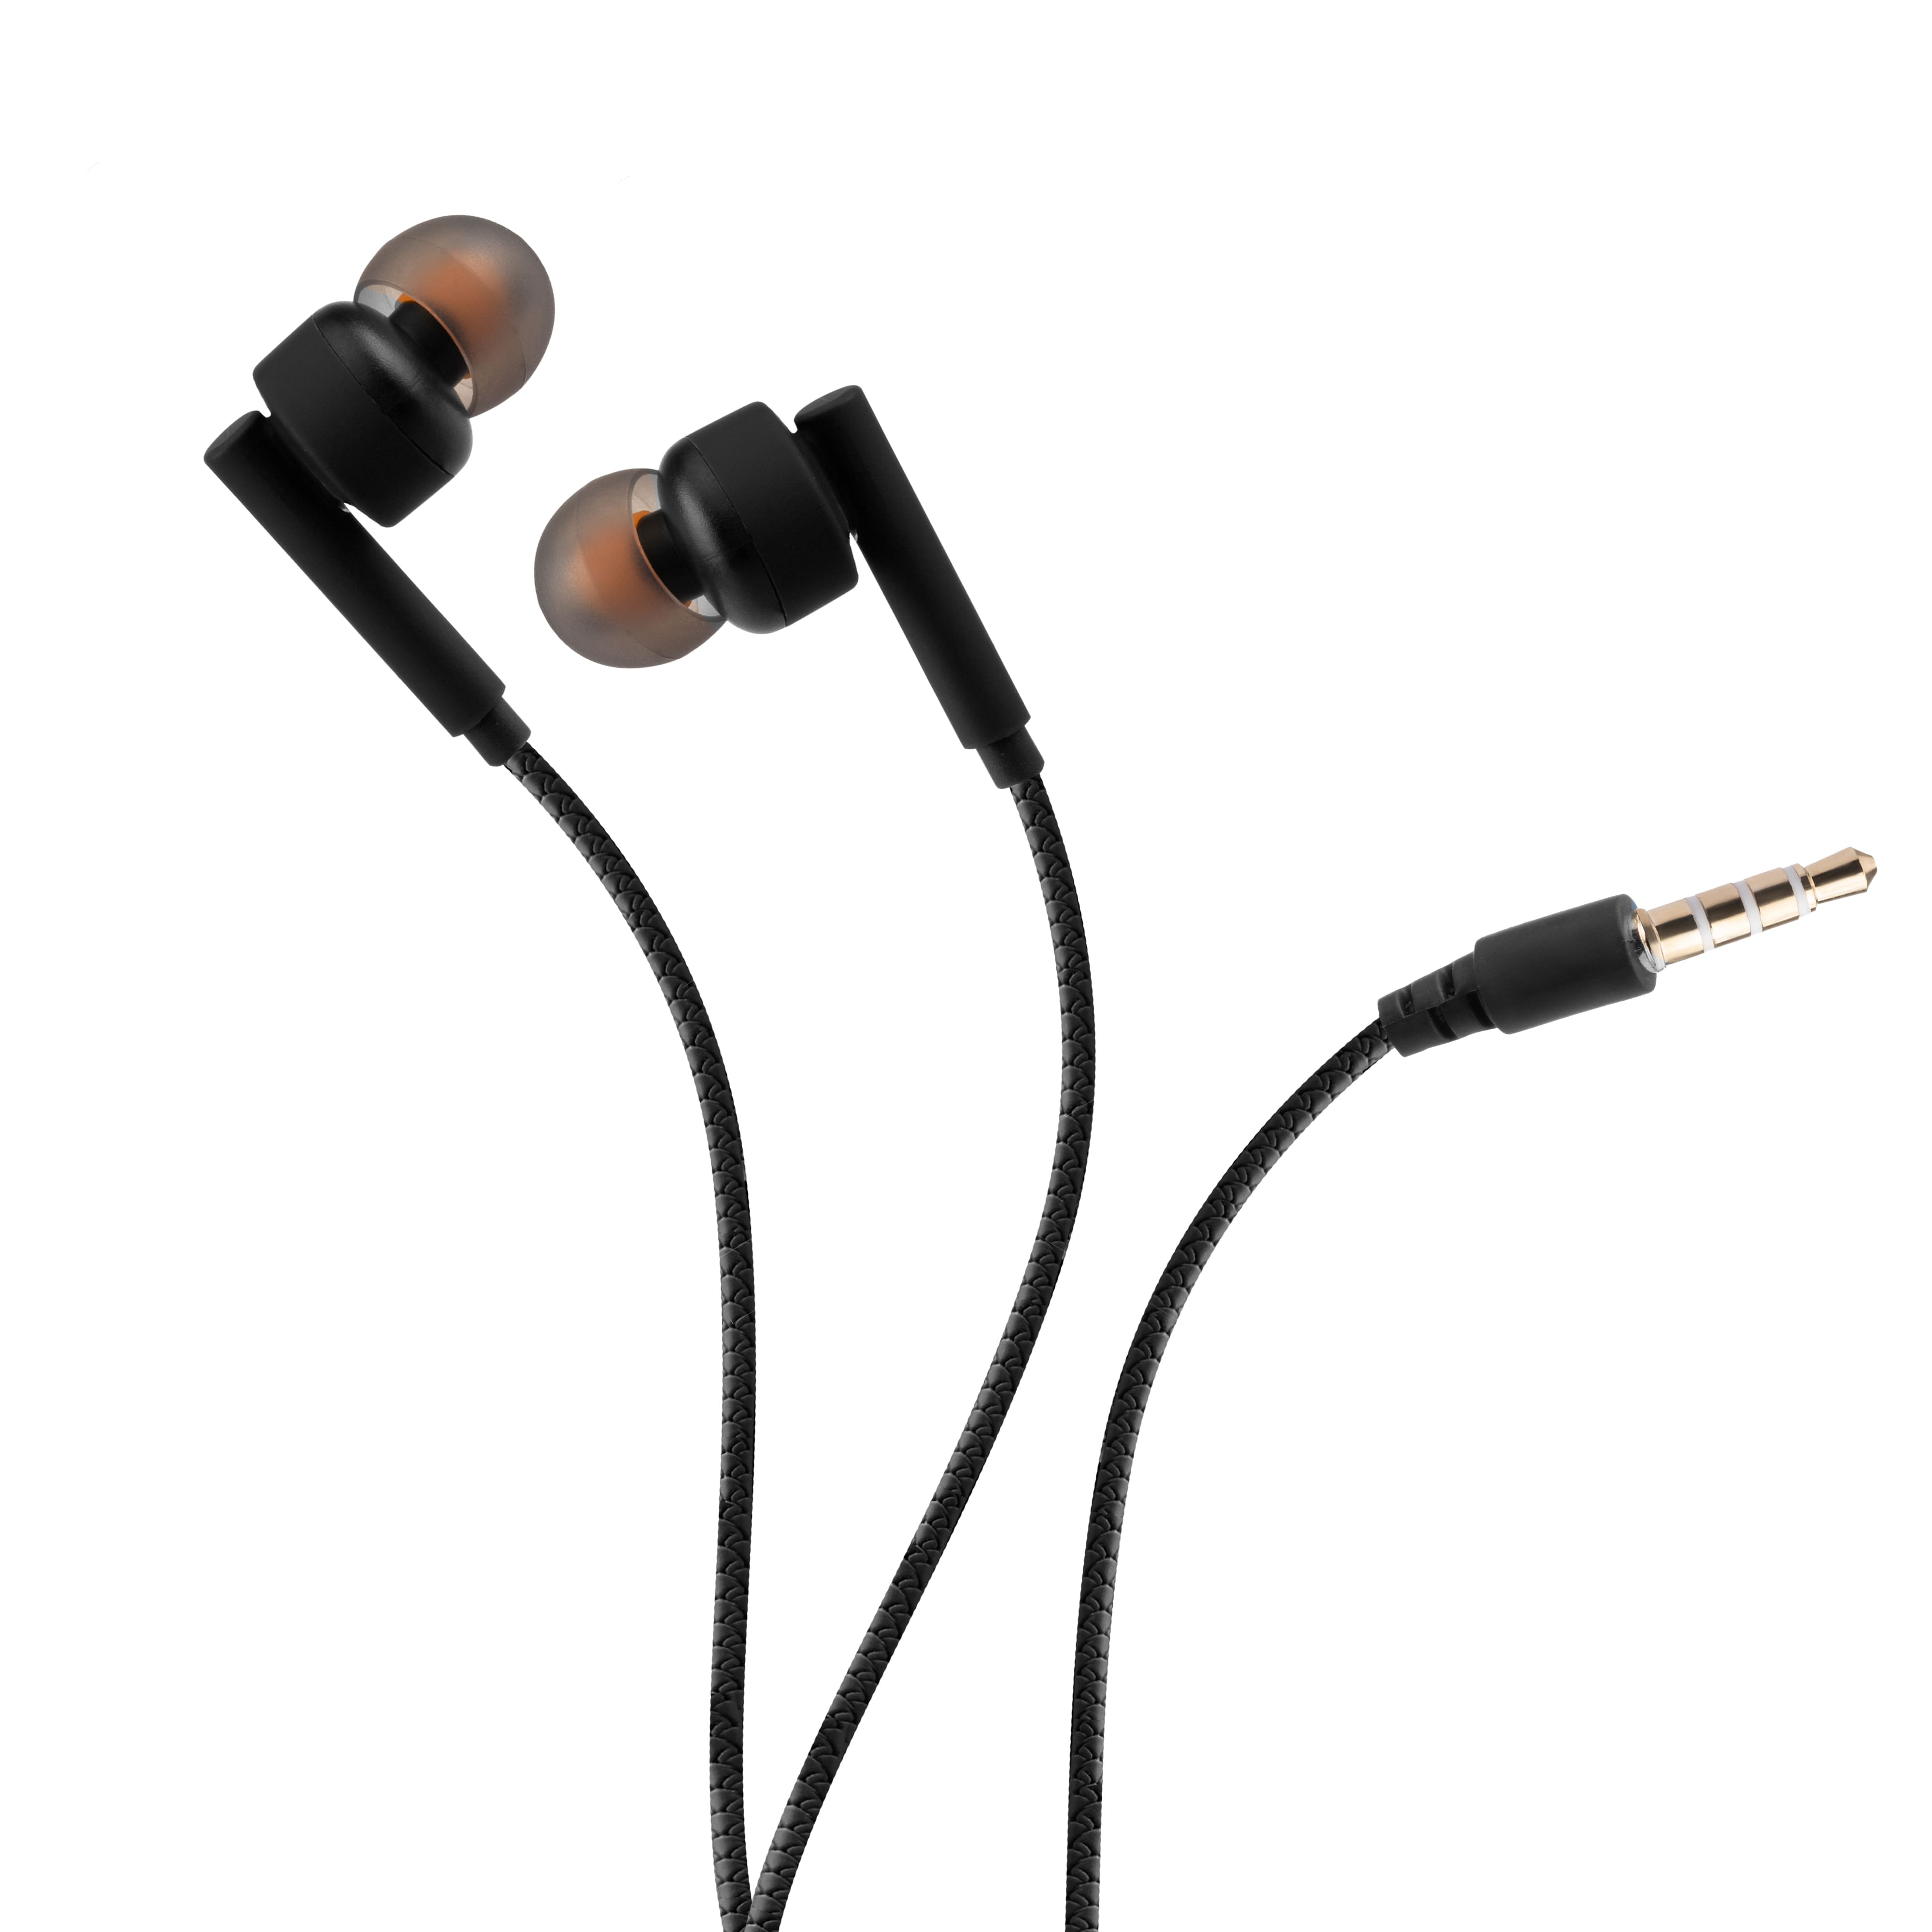 Lapcare WOOBUDS VI wired Earbuds with inbuilt MIC -Black (LBD-606)